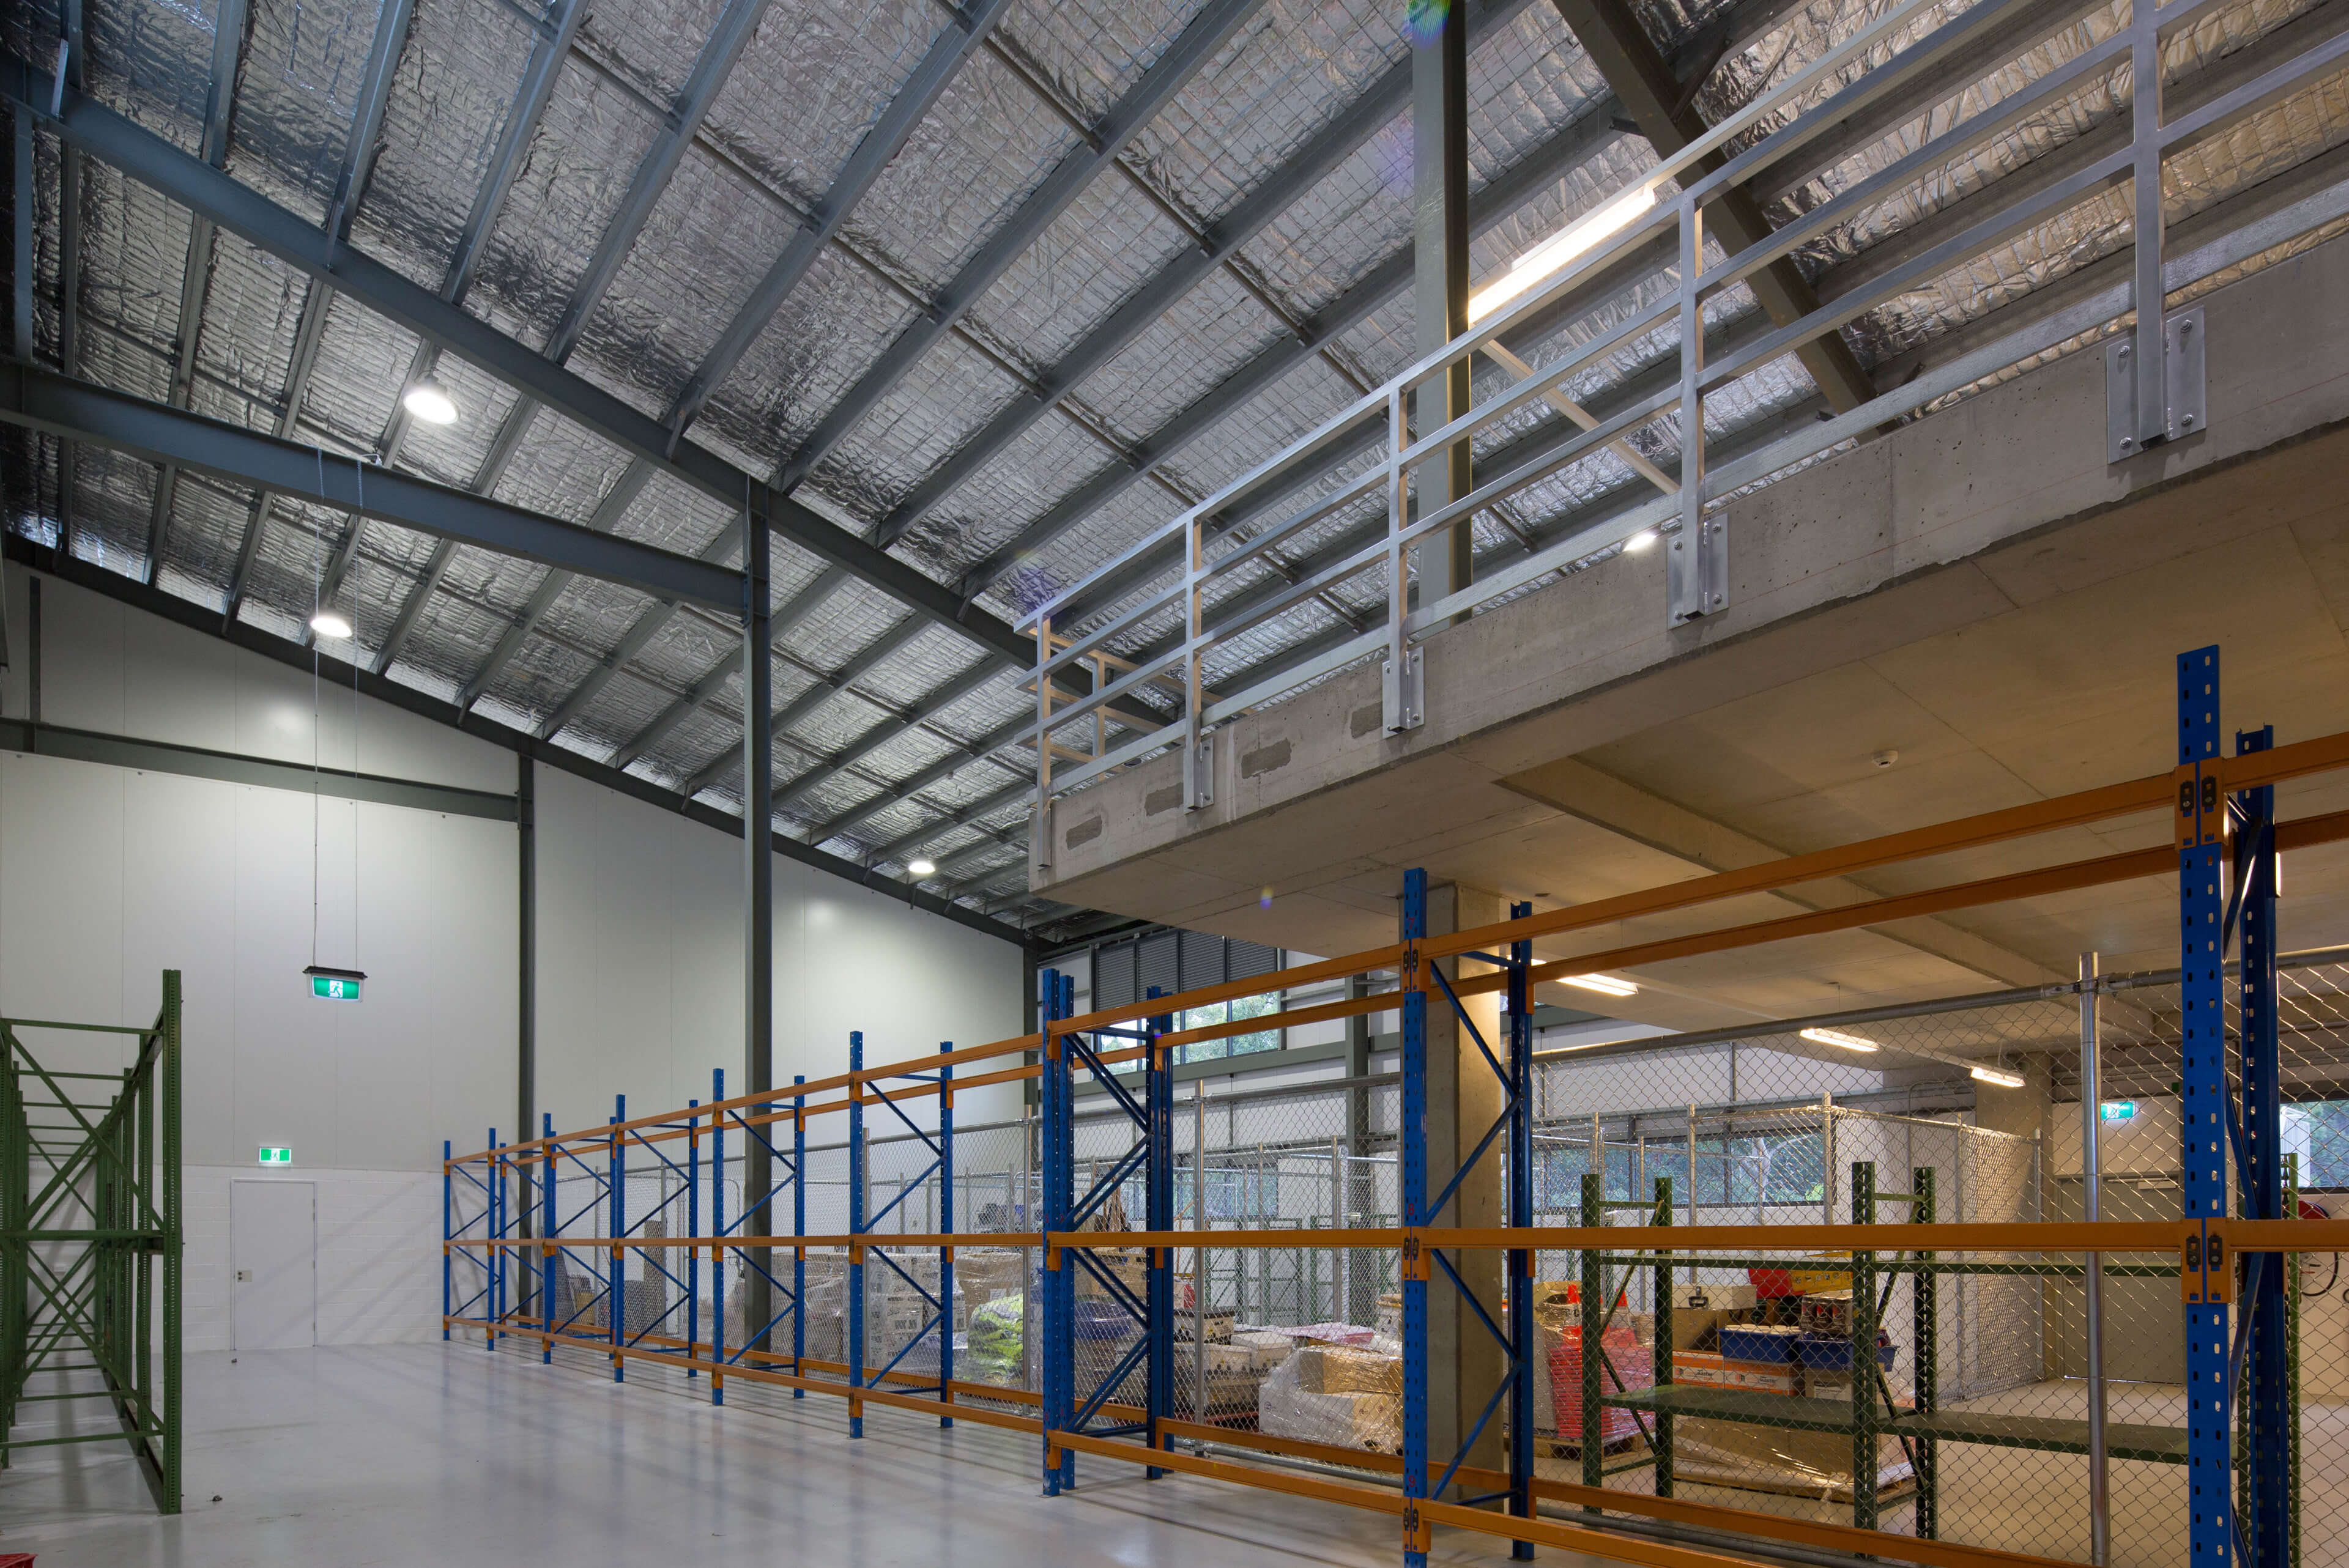 8 interior warehouse rydalemere operations centre taylor construction commercial